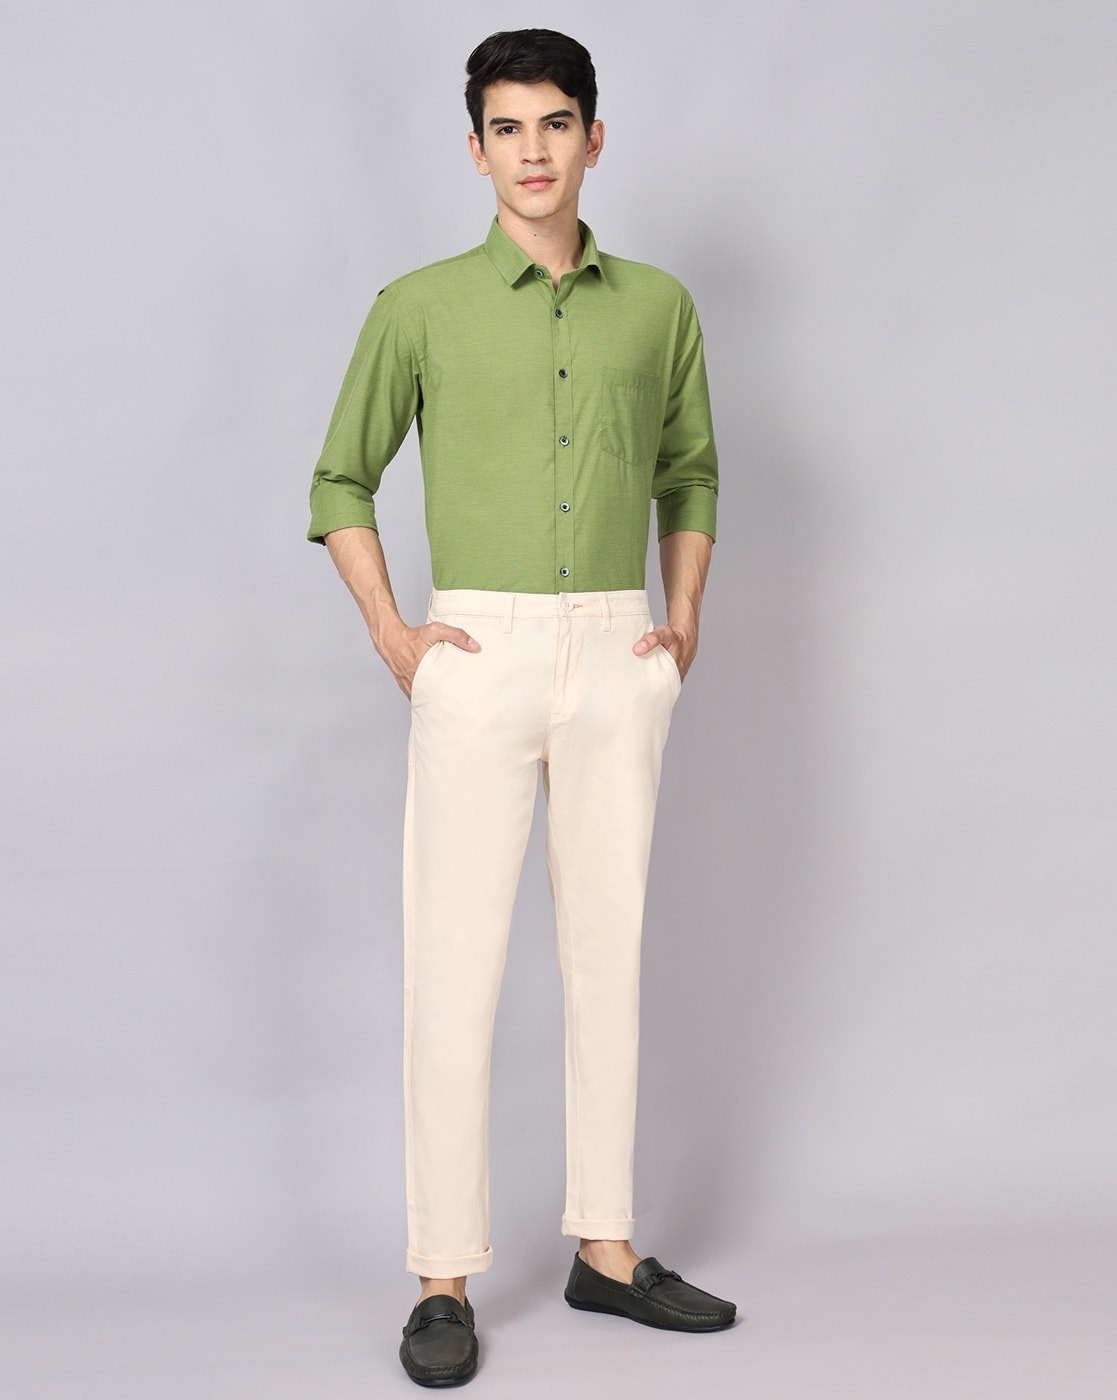 Five Ways To Wear Khaki Pants Outfits For Men  Effortless Gent